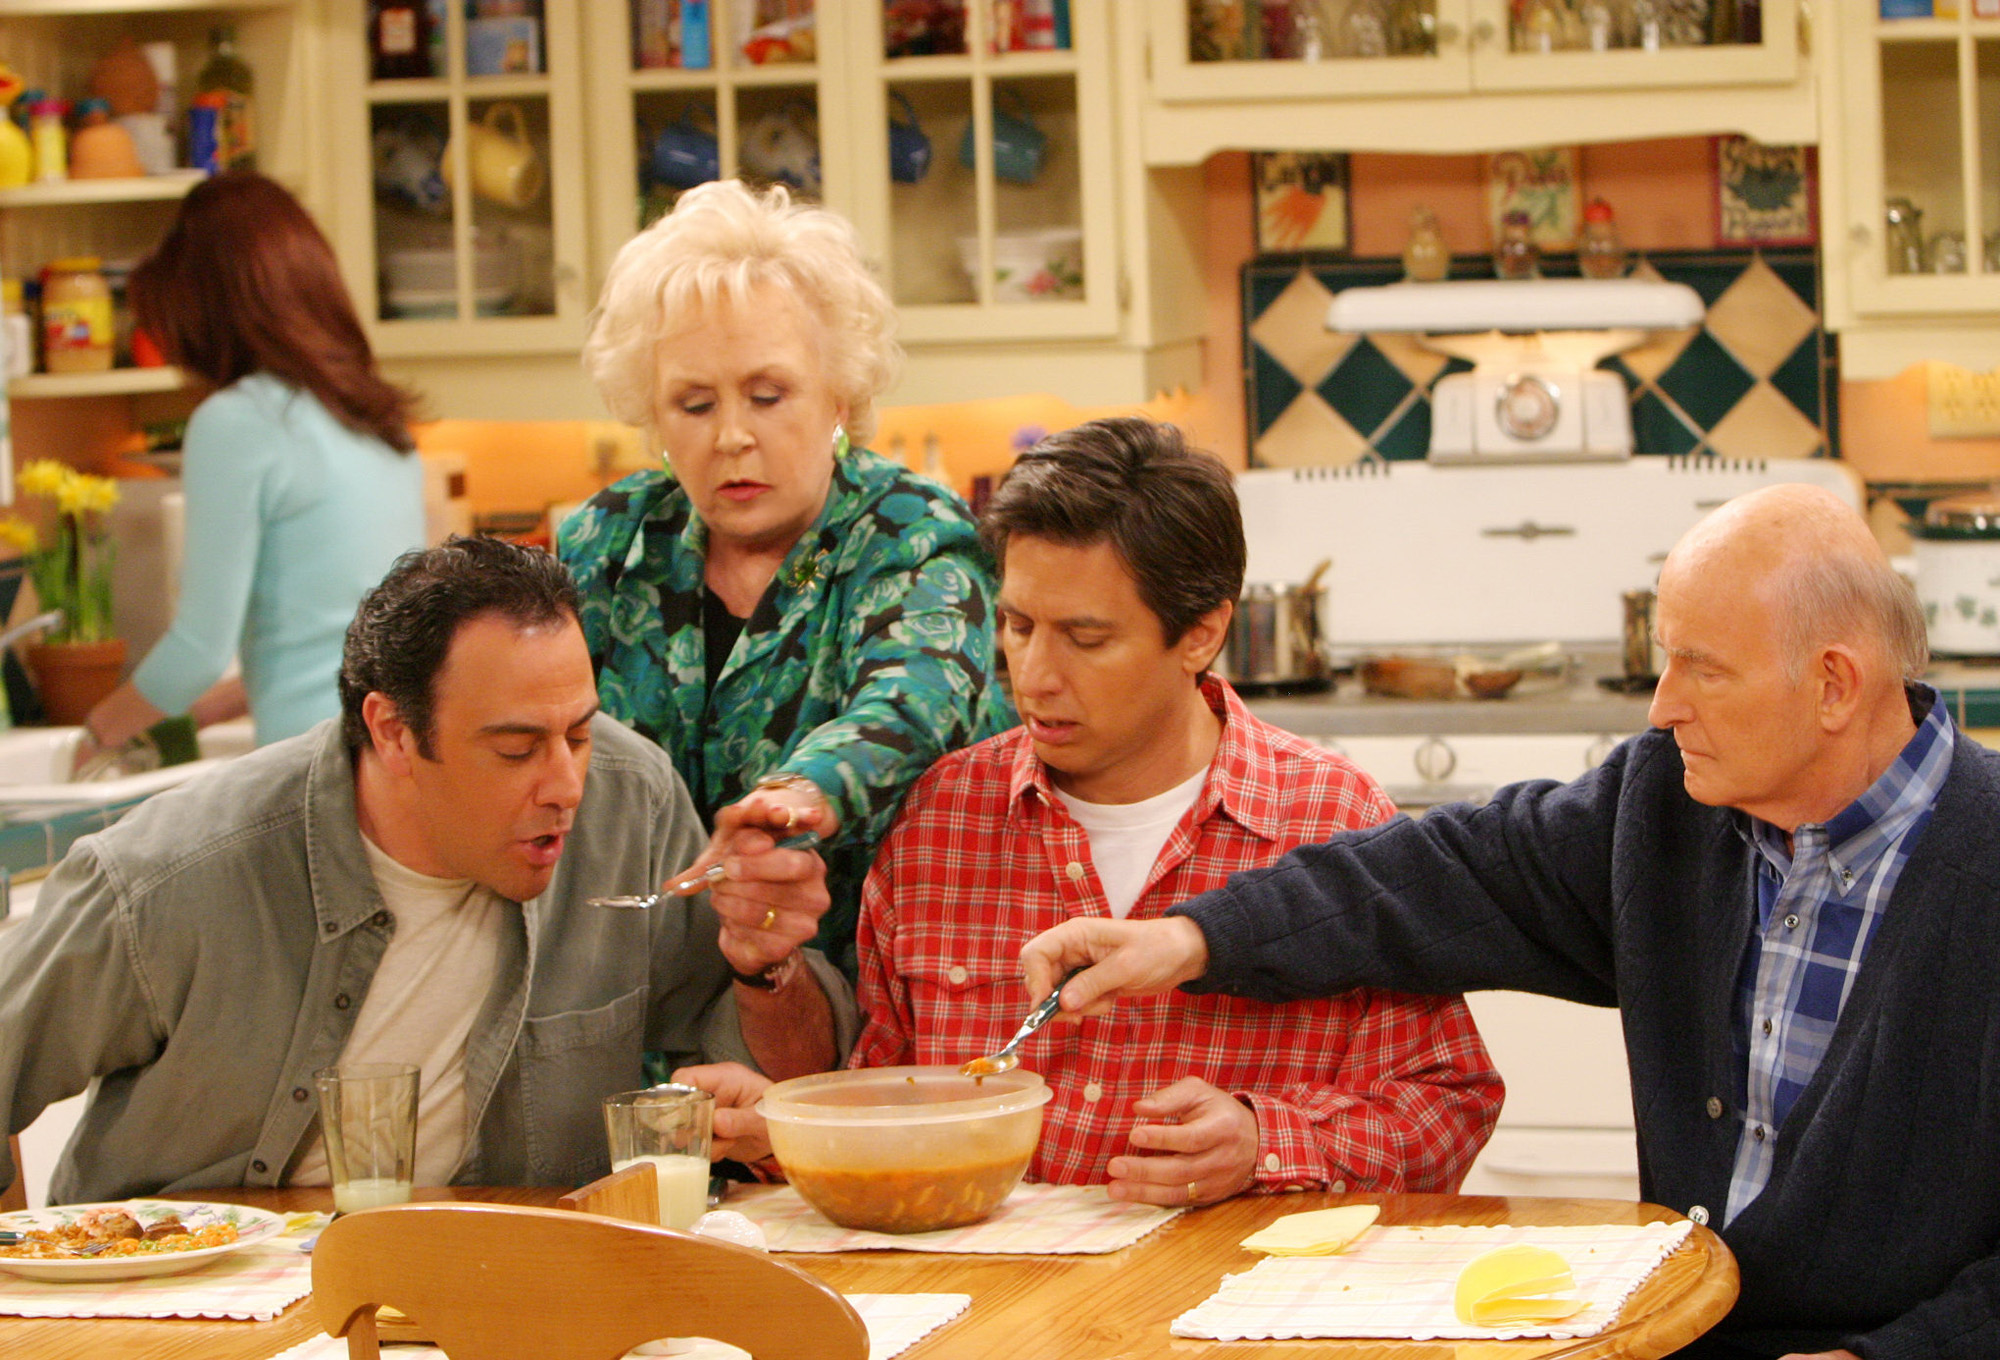 LOS ANGELES - APRIL 16:  Marie takes care of the three men in her life on the May 16 series finale of EVERYBODY LOVES RAYMOND.  From left to right:  Brad Garrett, Doris Roberts, Ray Romano, Peter Boyle.  Patricia Heaton featured in background.  (Photo by Robert Voets/CBS Photo Archive/Getty Images)